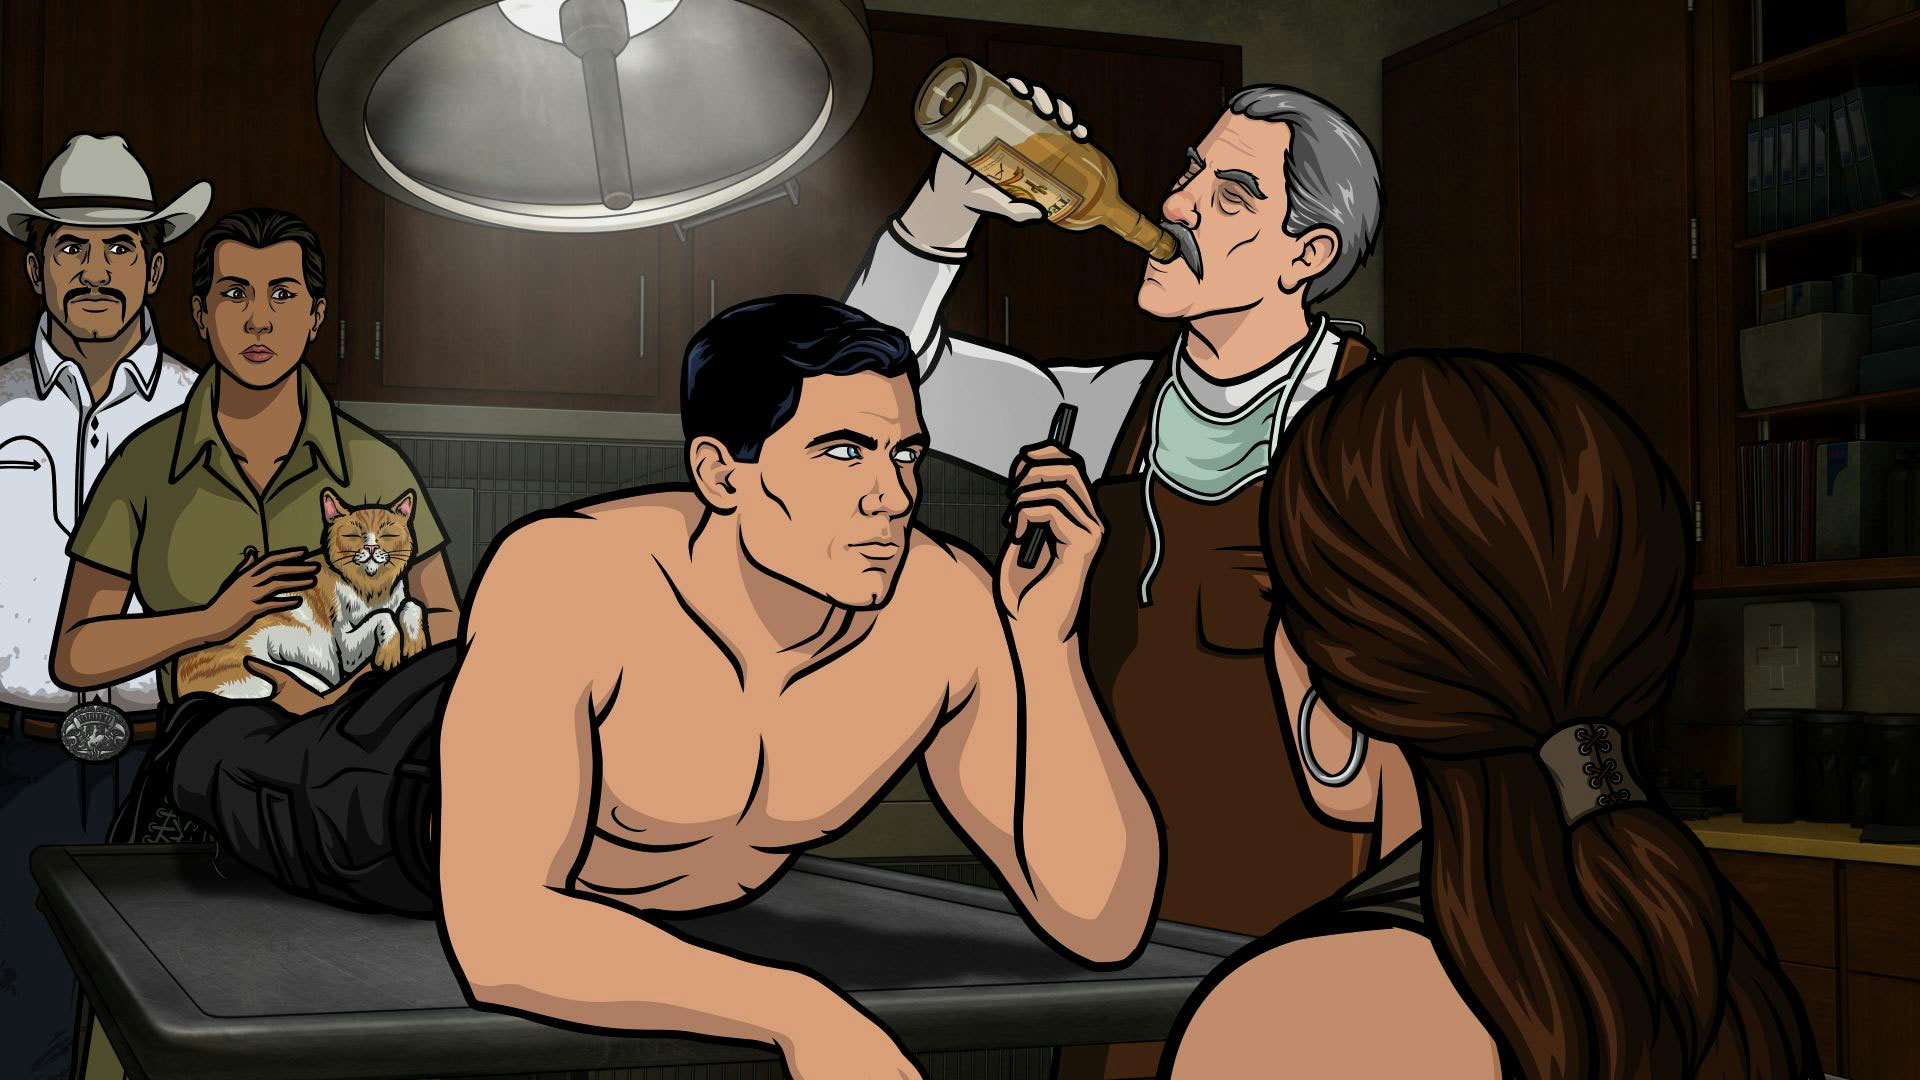 Archer Cartoon Nudity - Archer' Became the Most Sexually Progressive S...